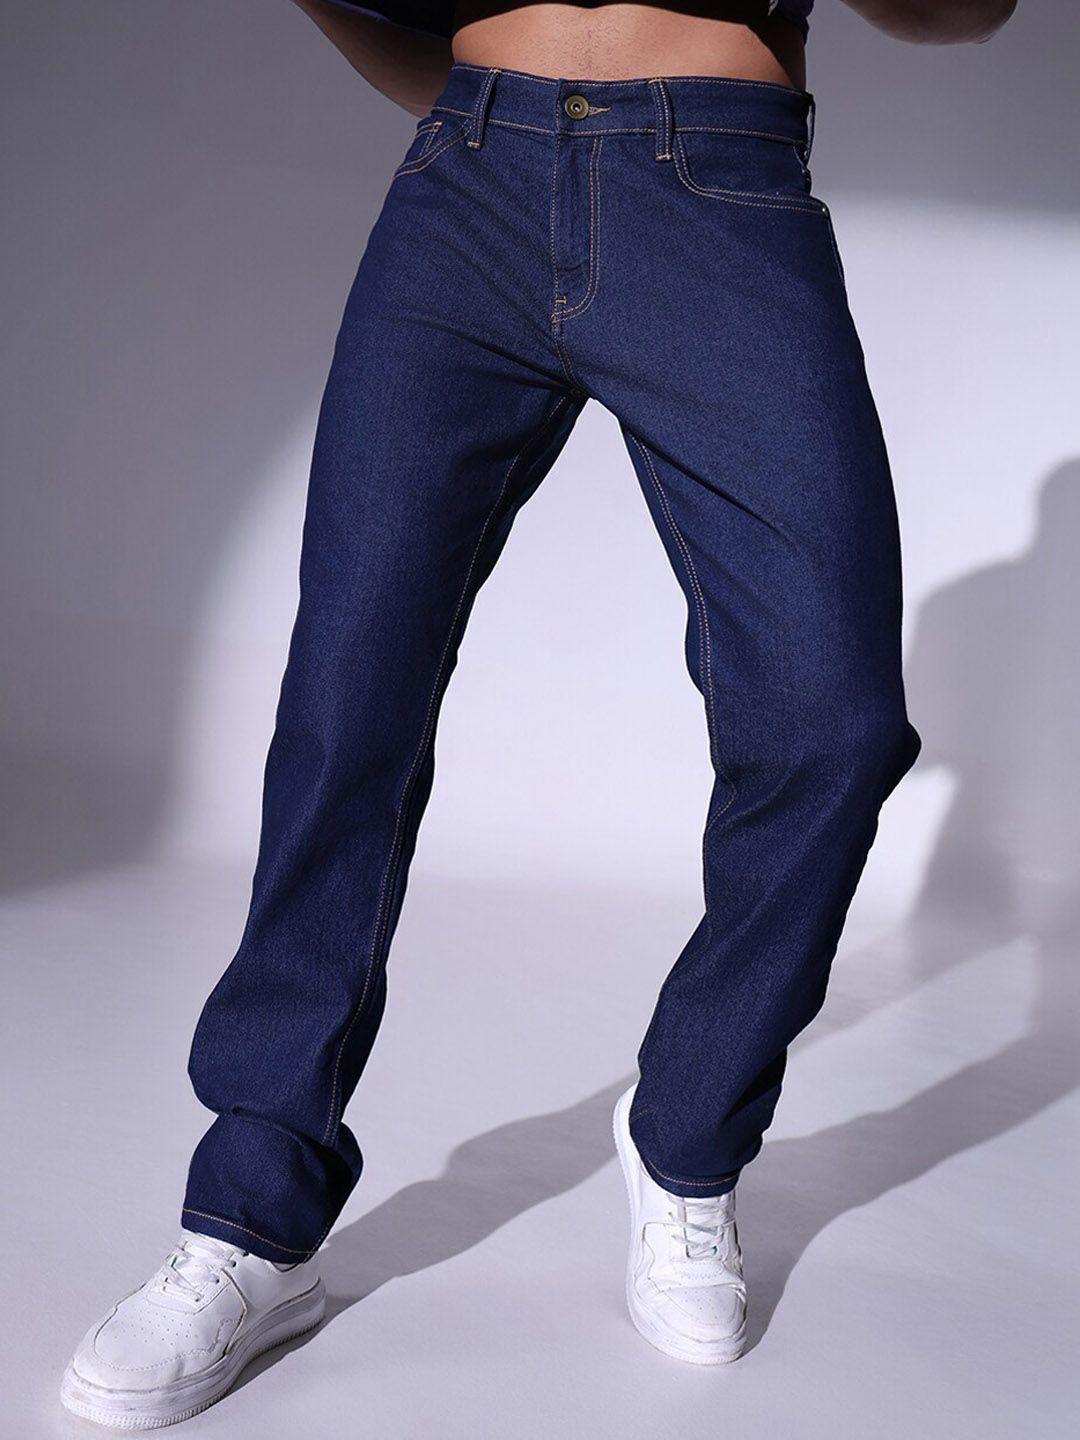 hubberholme men relaxed fit clean look stretchable jeans